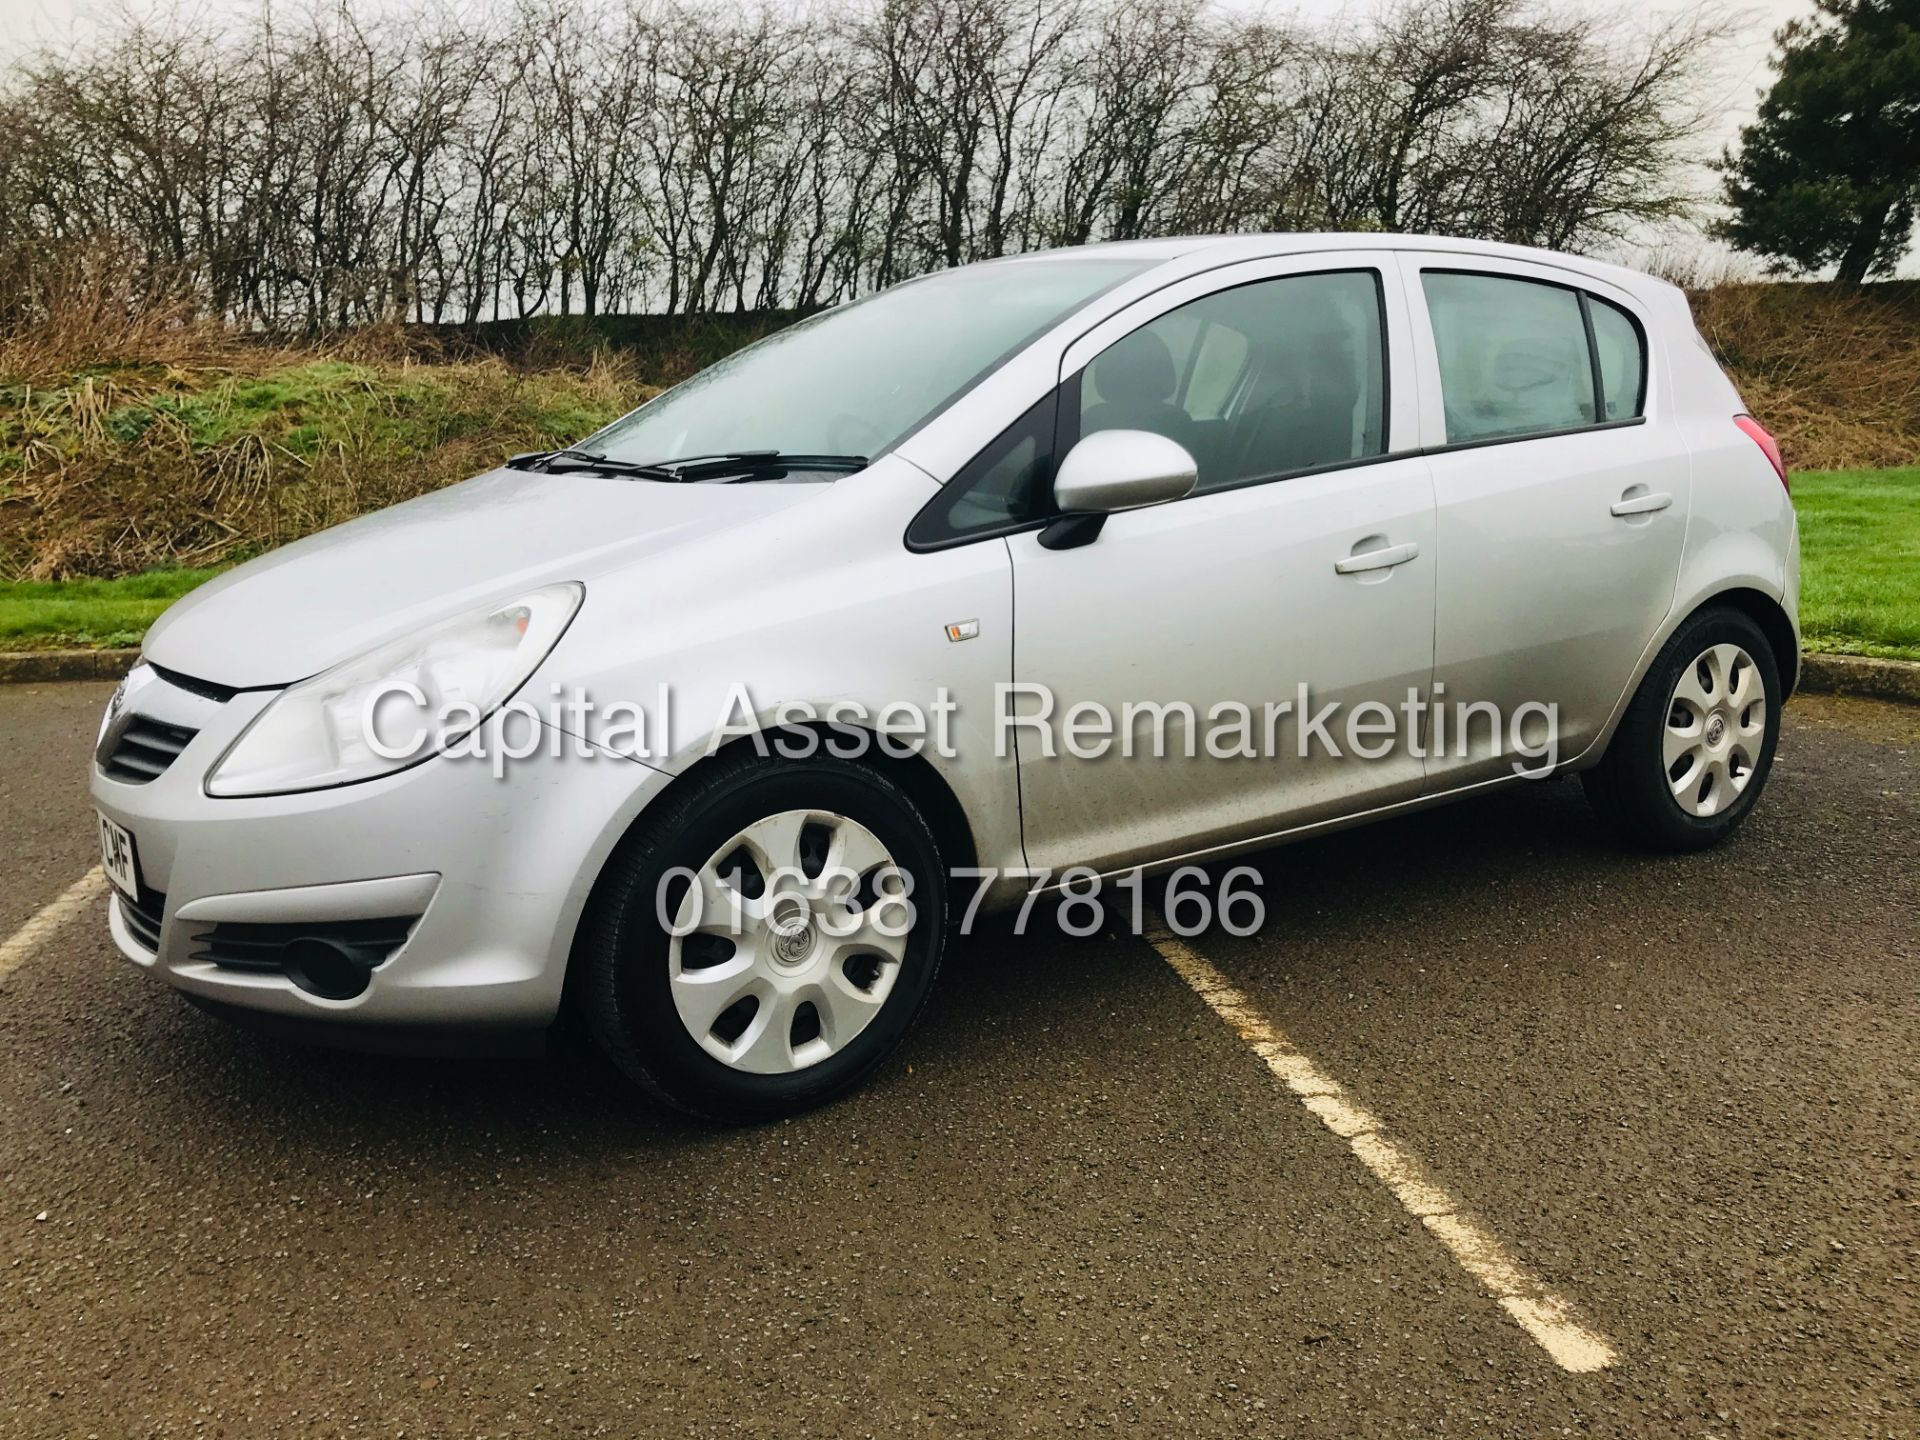 VAUXHALL CORSA 1.3CDTI ECOFLEX "EXCLUSIVE" 5 DOOR (10 REG) 1 COUNCIL OWNER FROM NEW (NO VAT TO PAY)